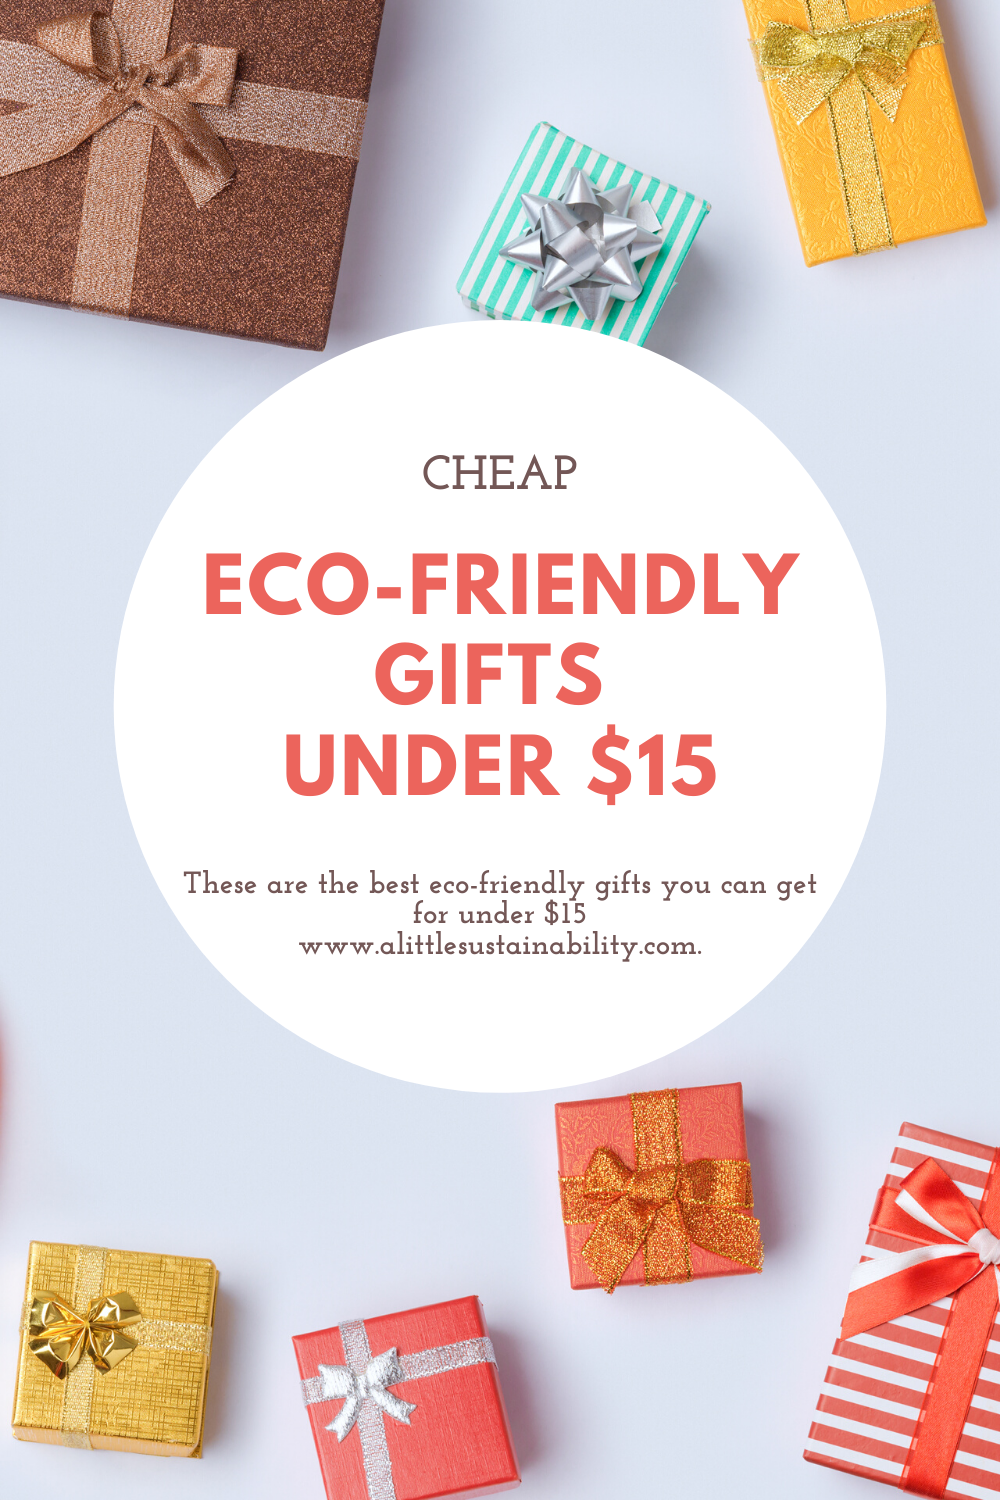 https://alittlesustainability.com/wp-content/uploads/2020/06/low-waste-Gifts-6.png